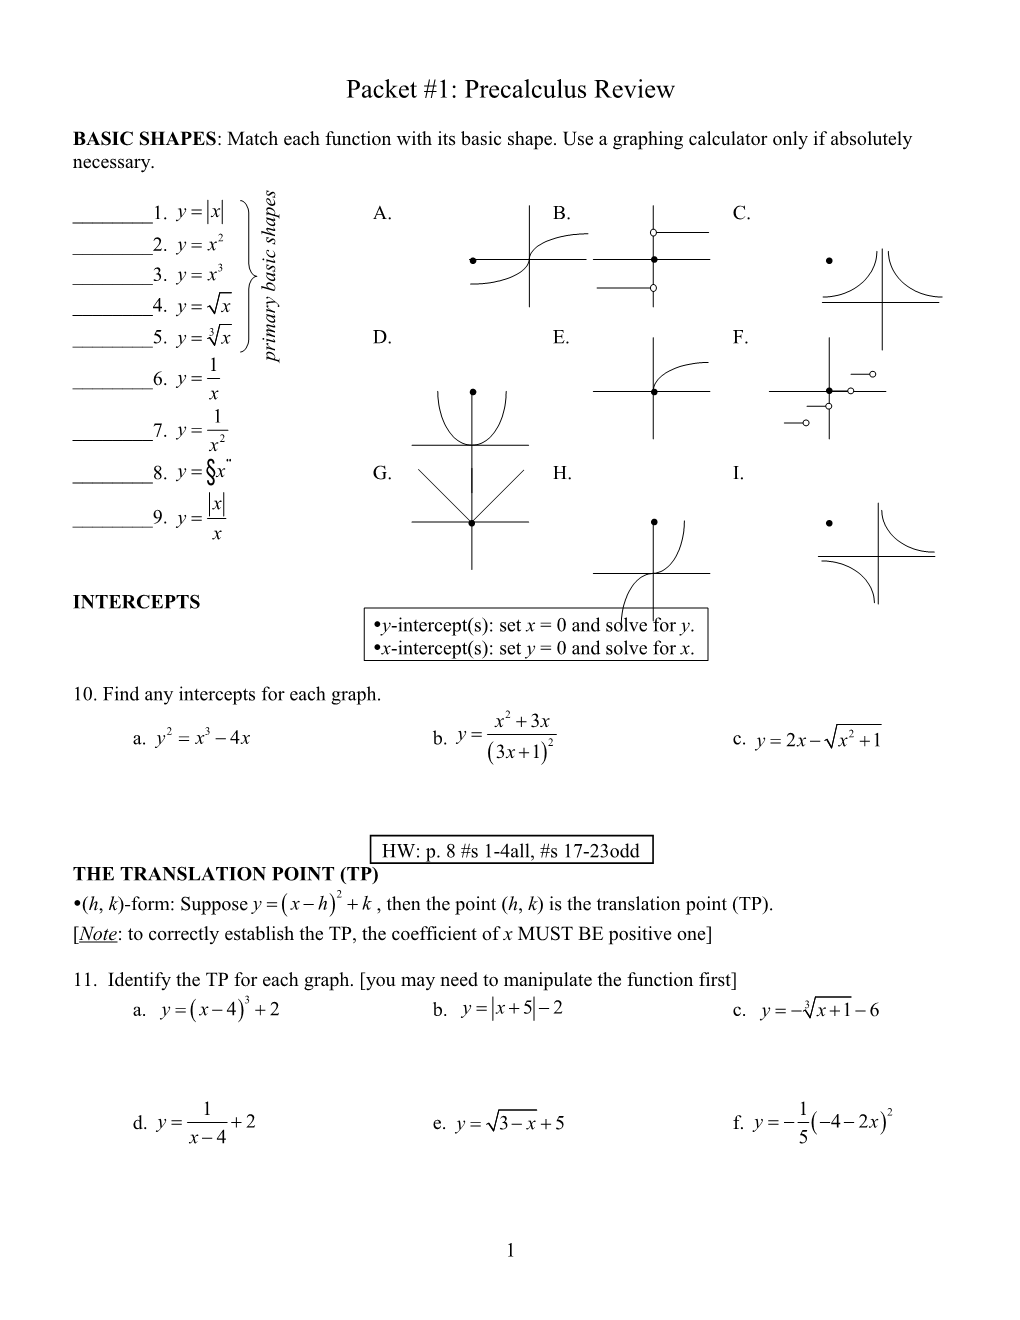 Packet #1: Precalculus Review